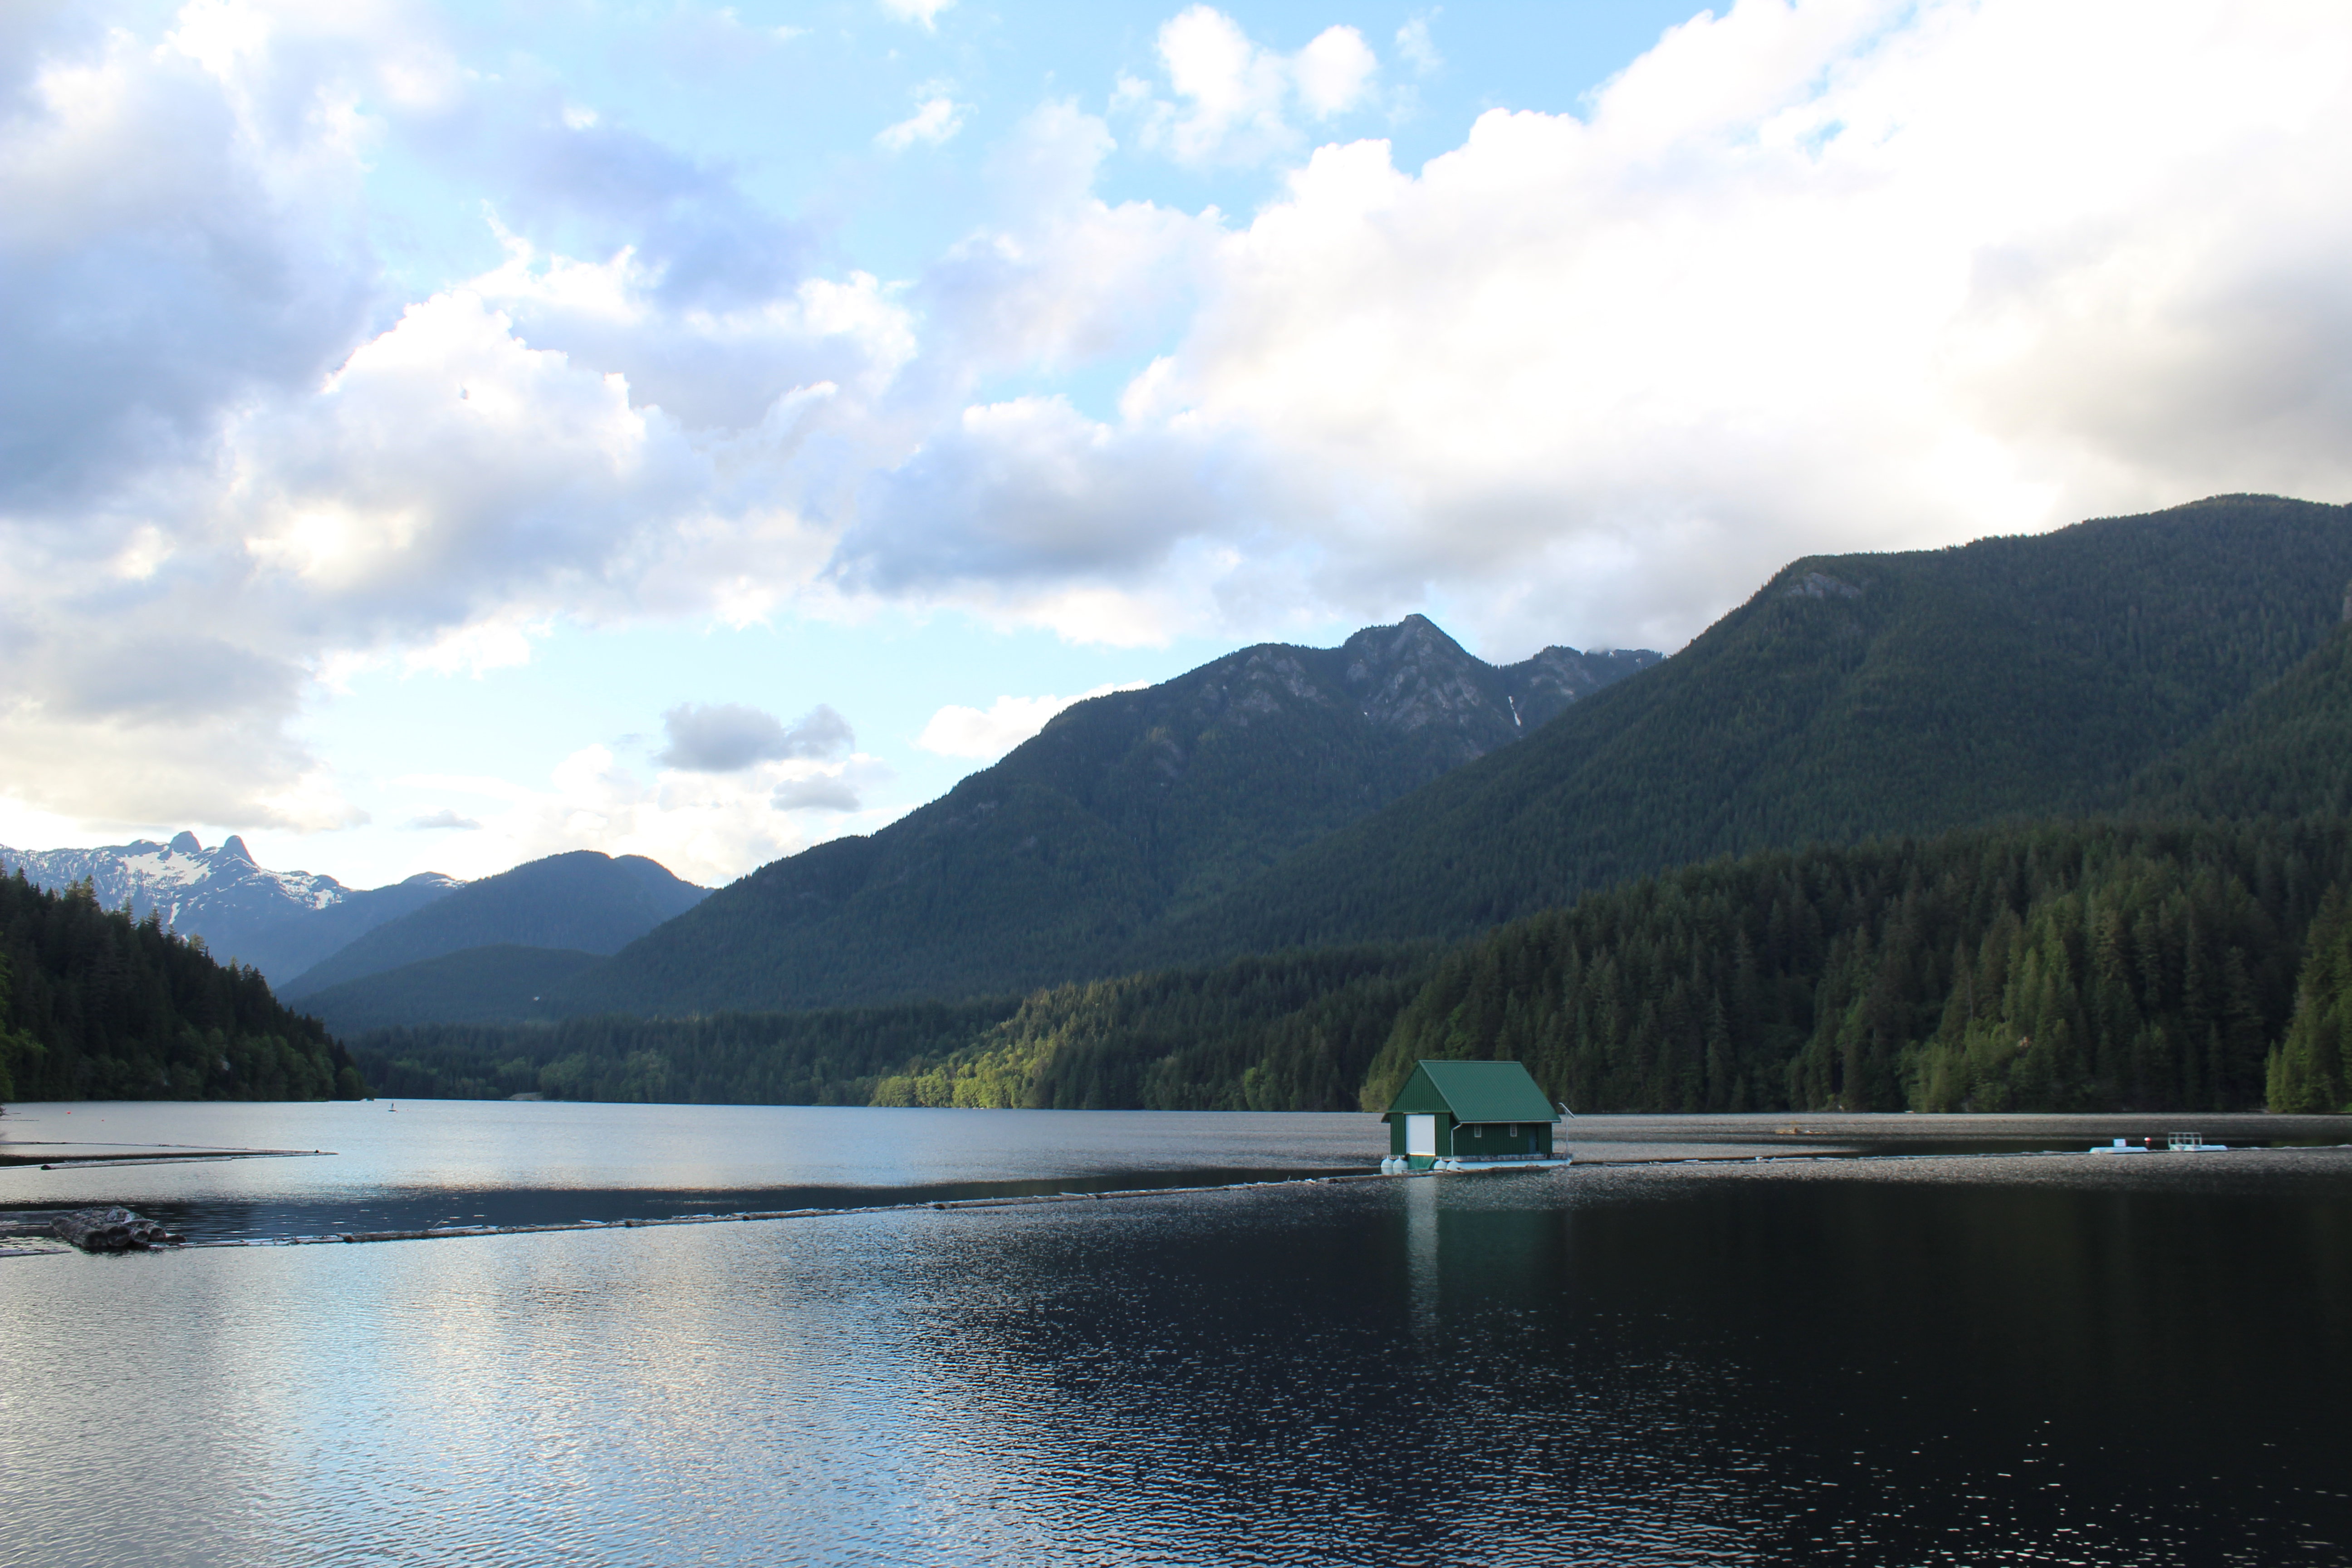 Cleveland dam creates Capilano Reservoir, which is a picturesque and tranquil little escape from the city.